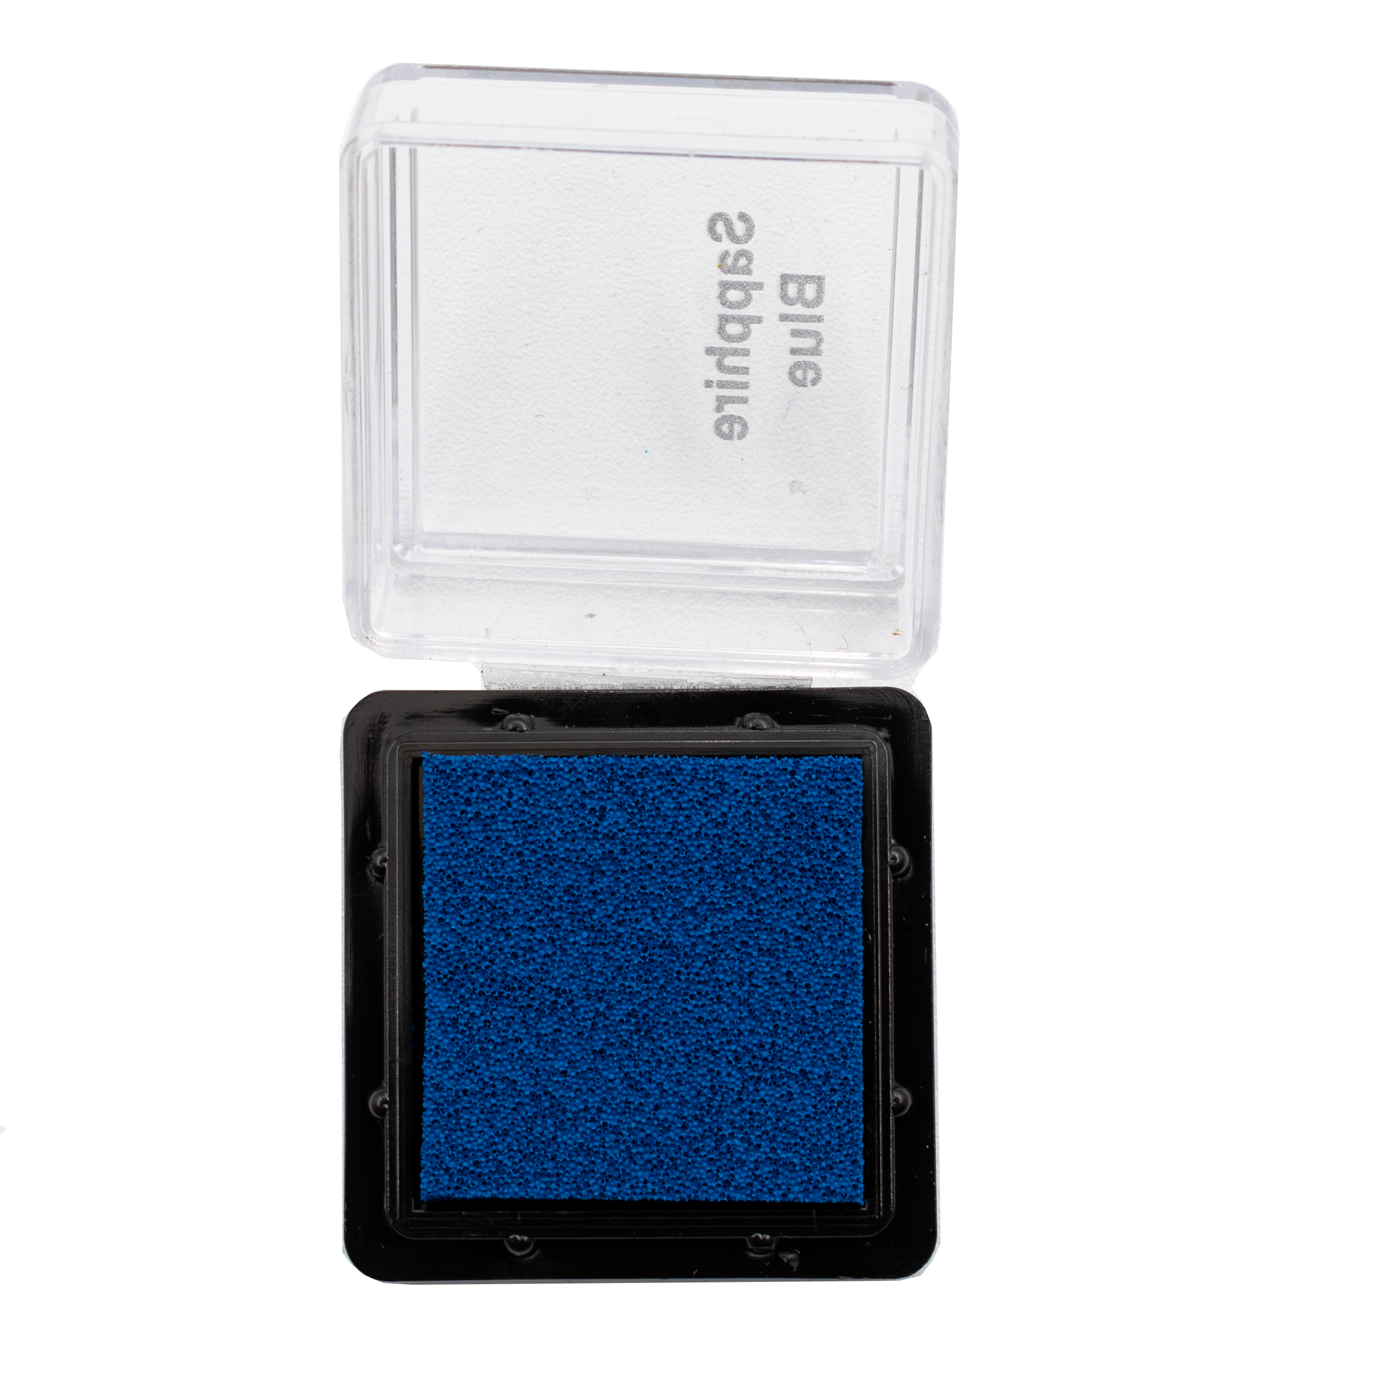 Global Solutions Sapphire Blue Stamp Pad